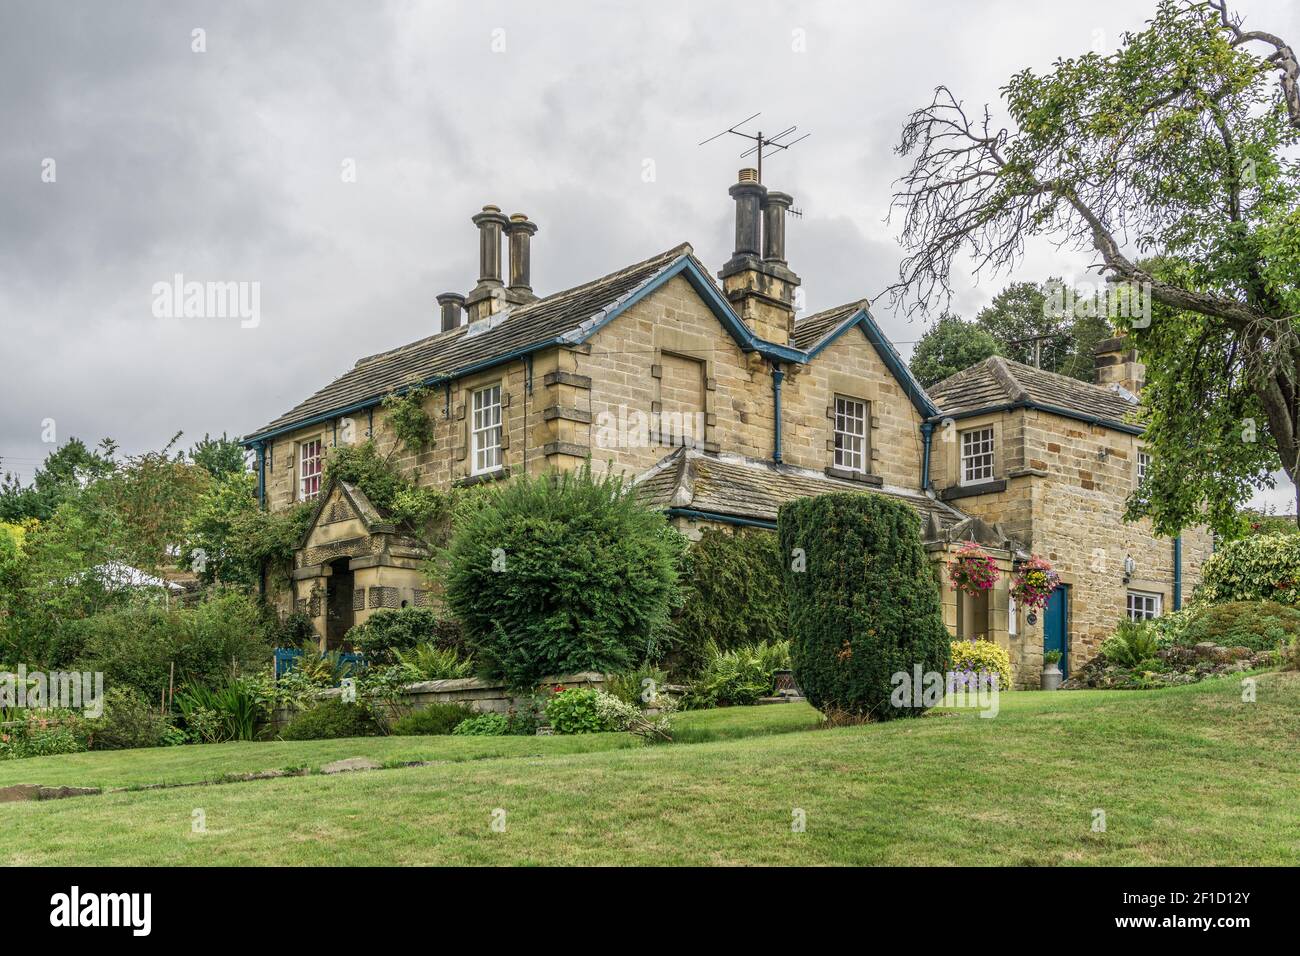 Stormy skies over a detached stone built period property in the estate village of Edensor, Derbyshire, UK Stock Photo